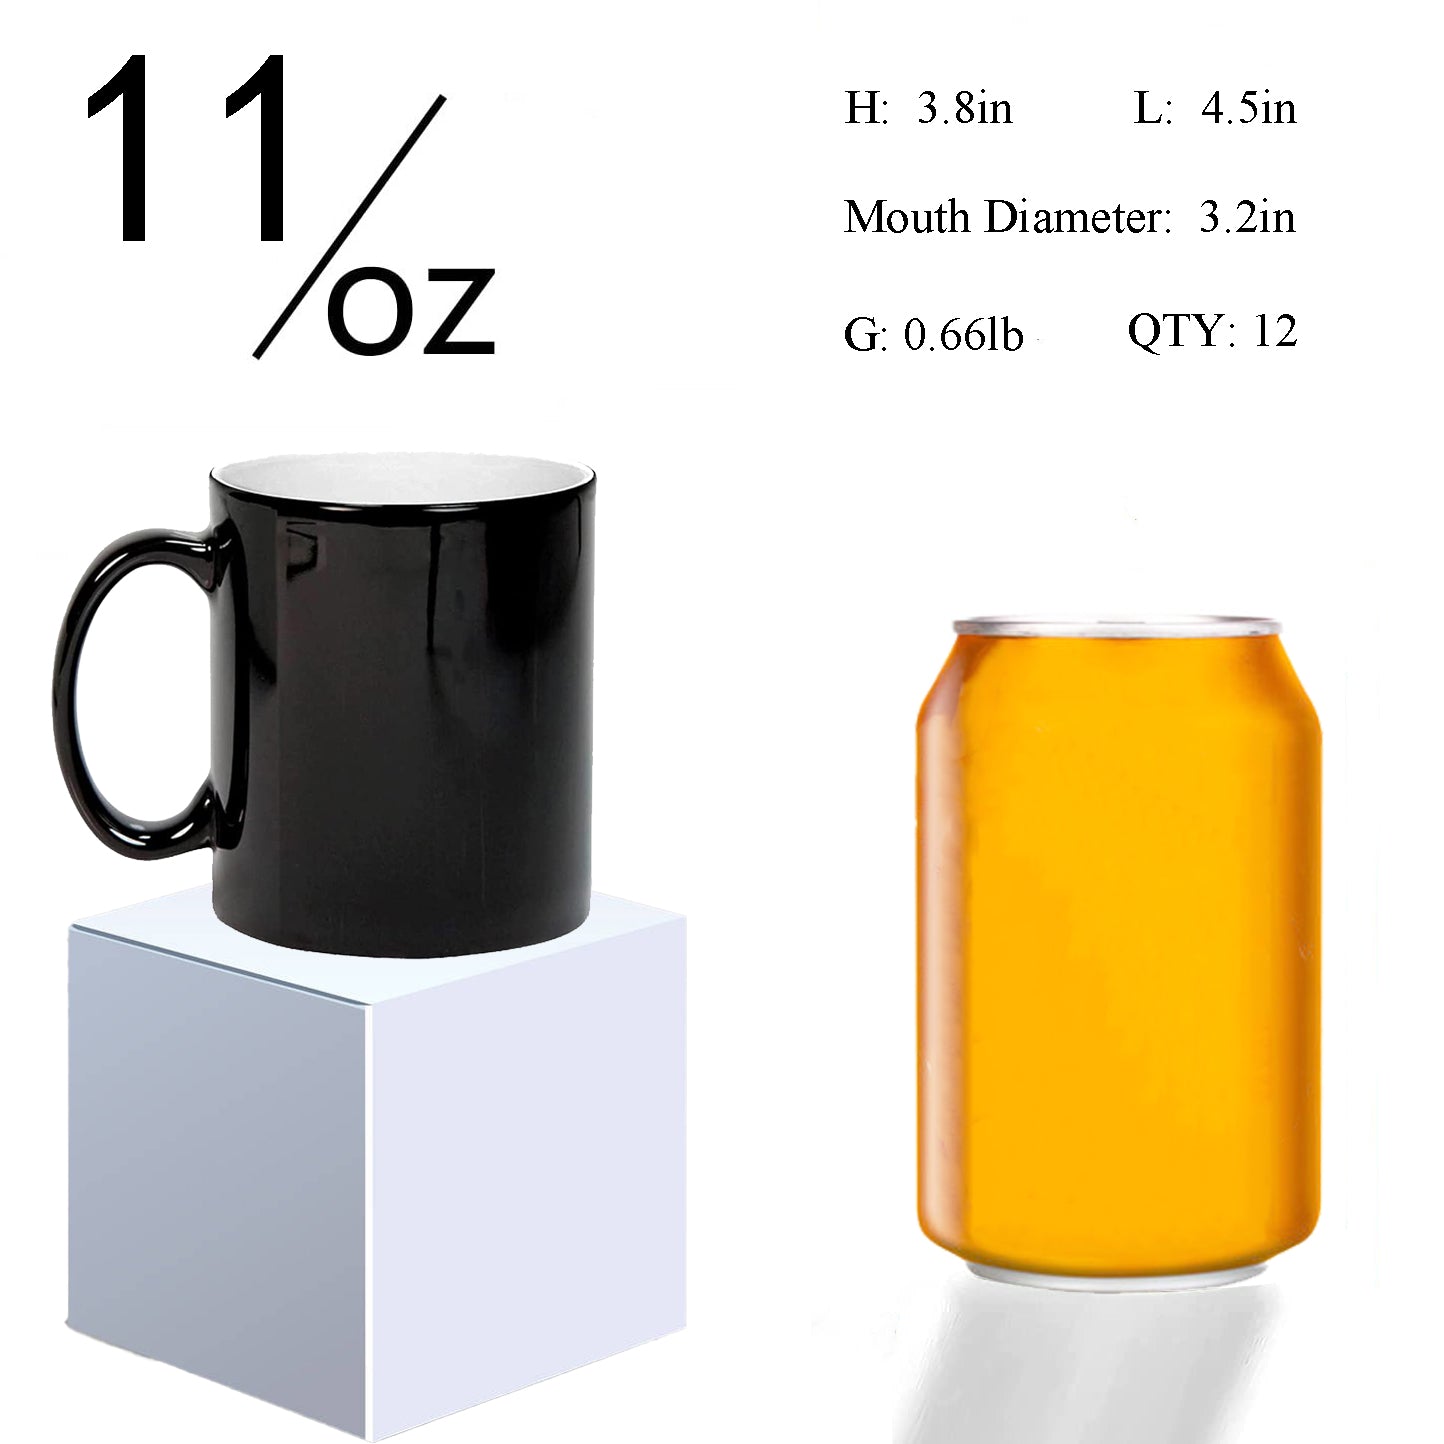 12 Pack Color Changing Mug 11 Ounce and 15 Ounce with Boxes